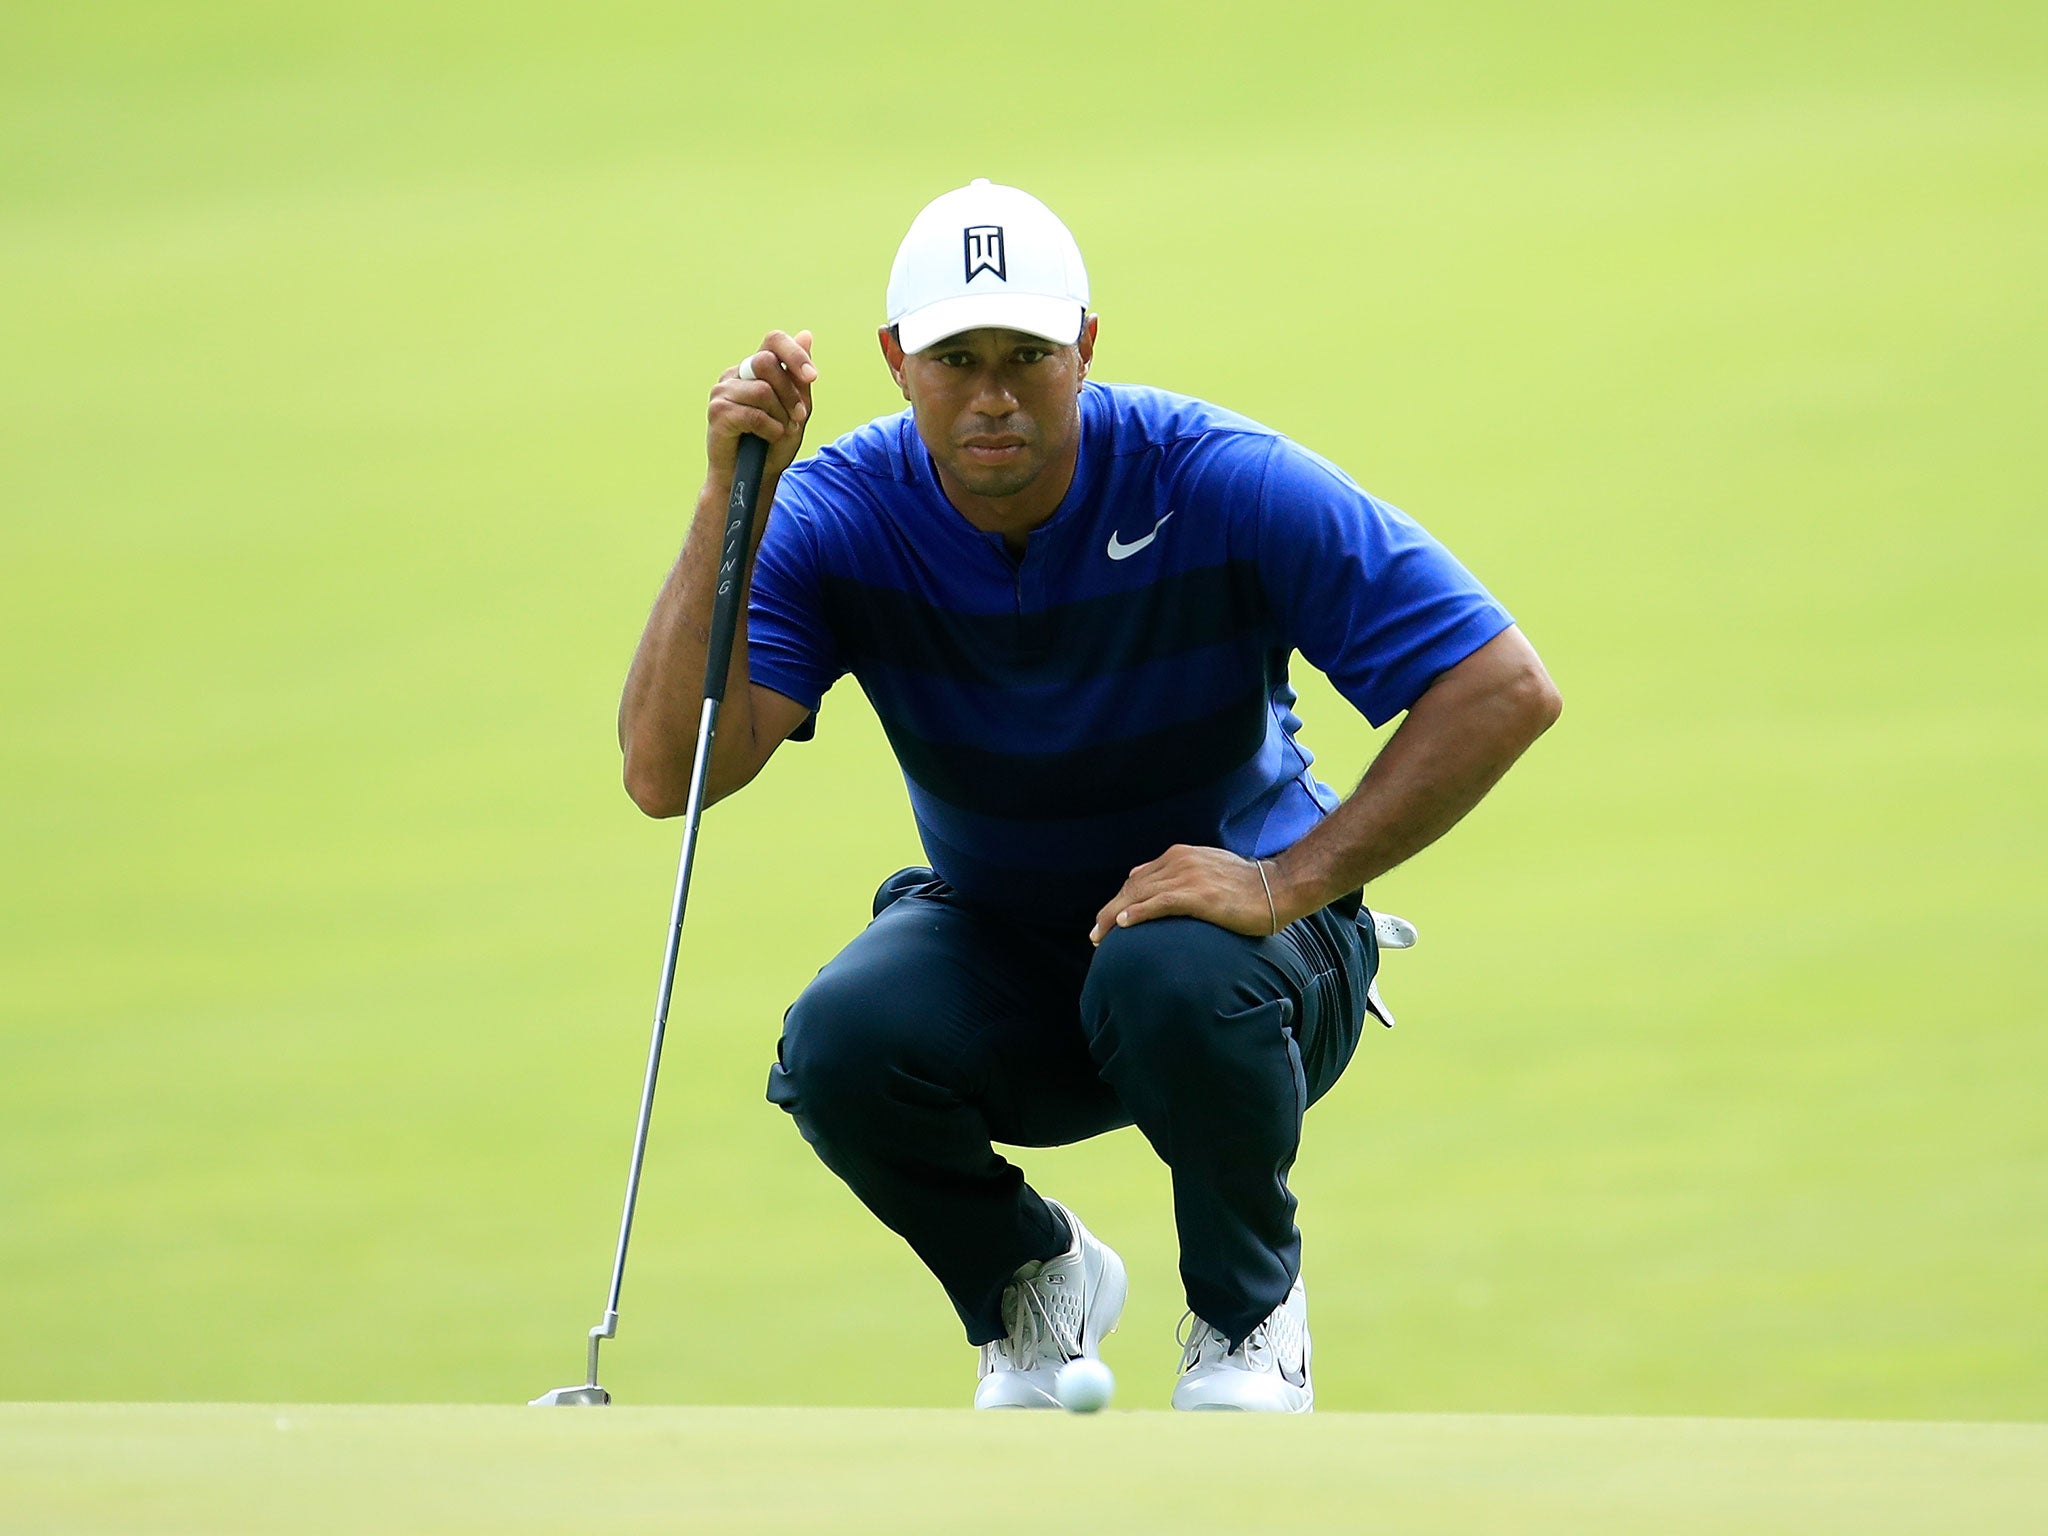 Woods moved into contention on Friday